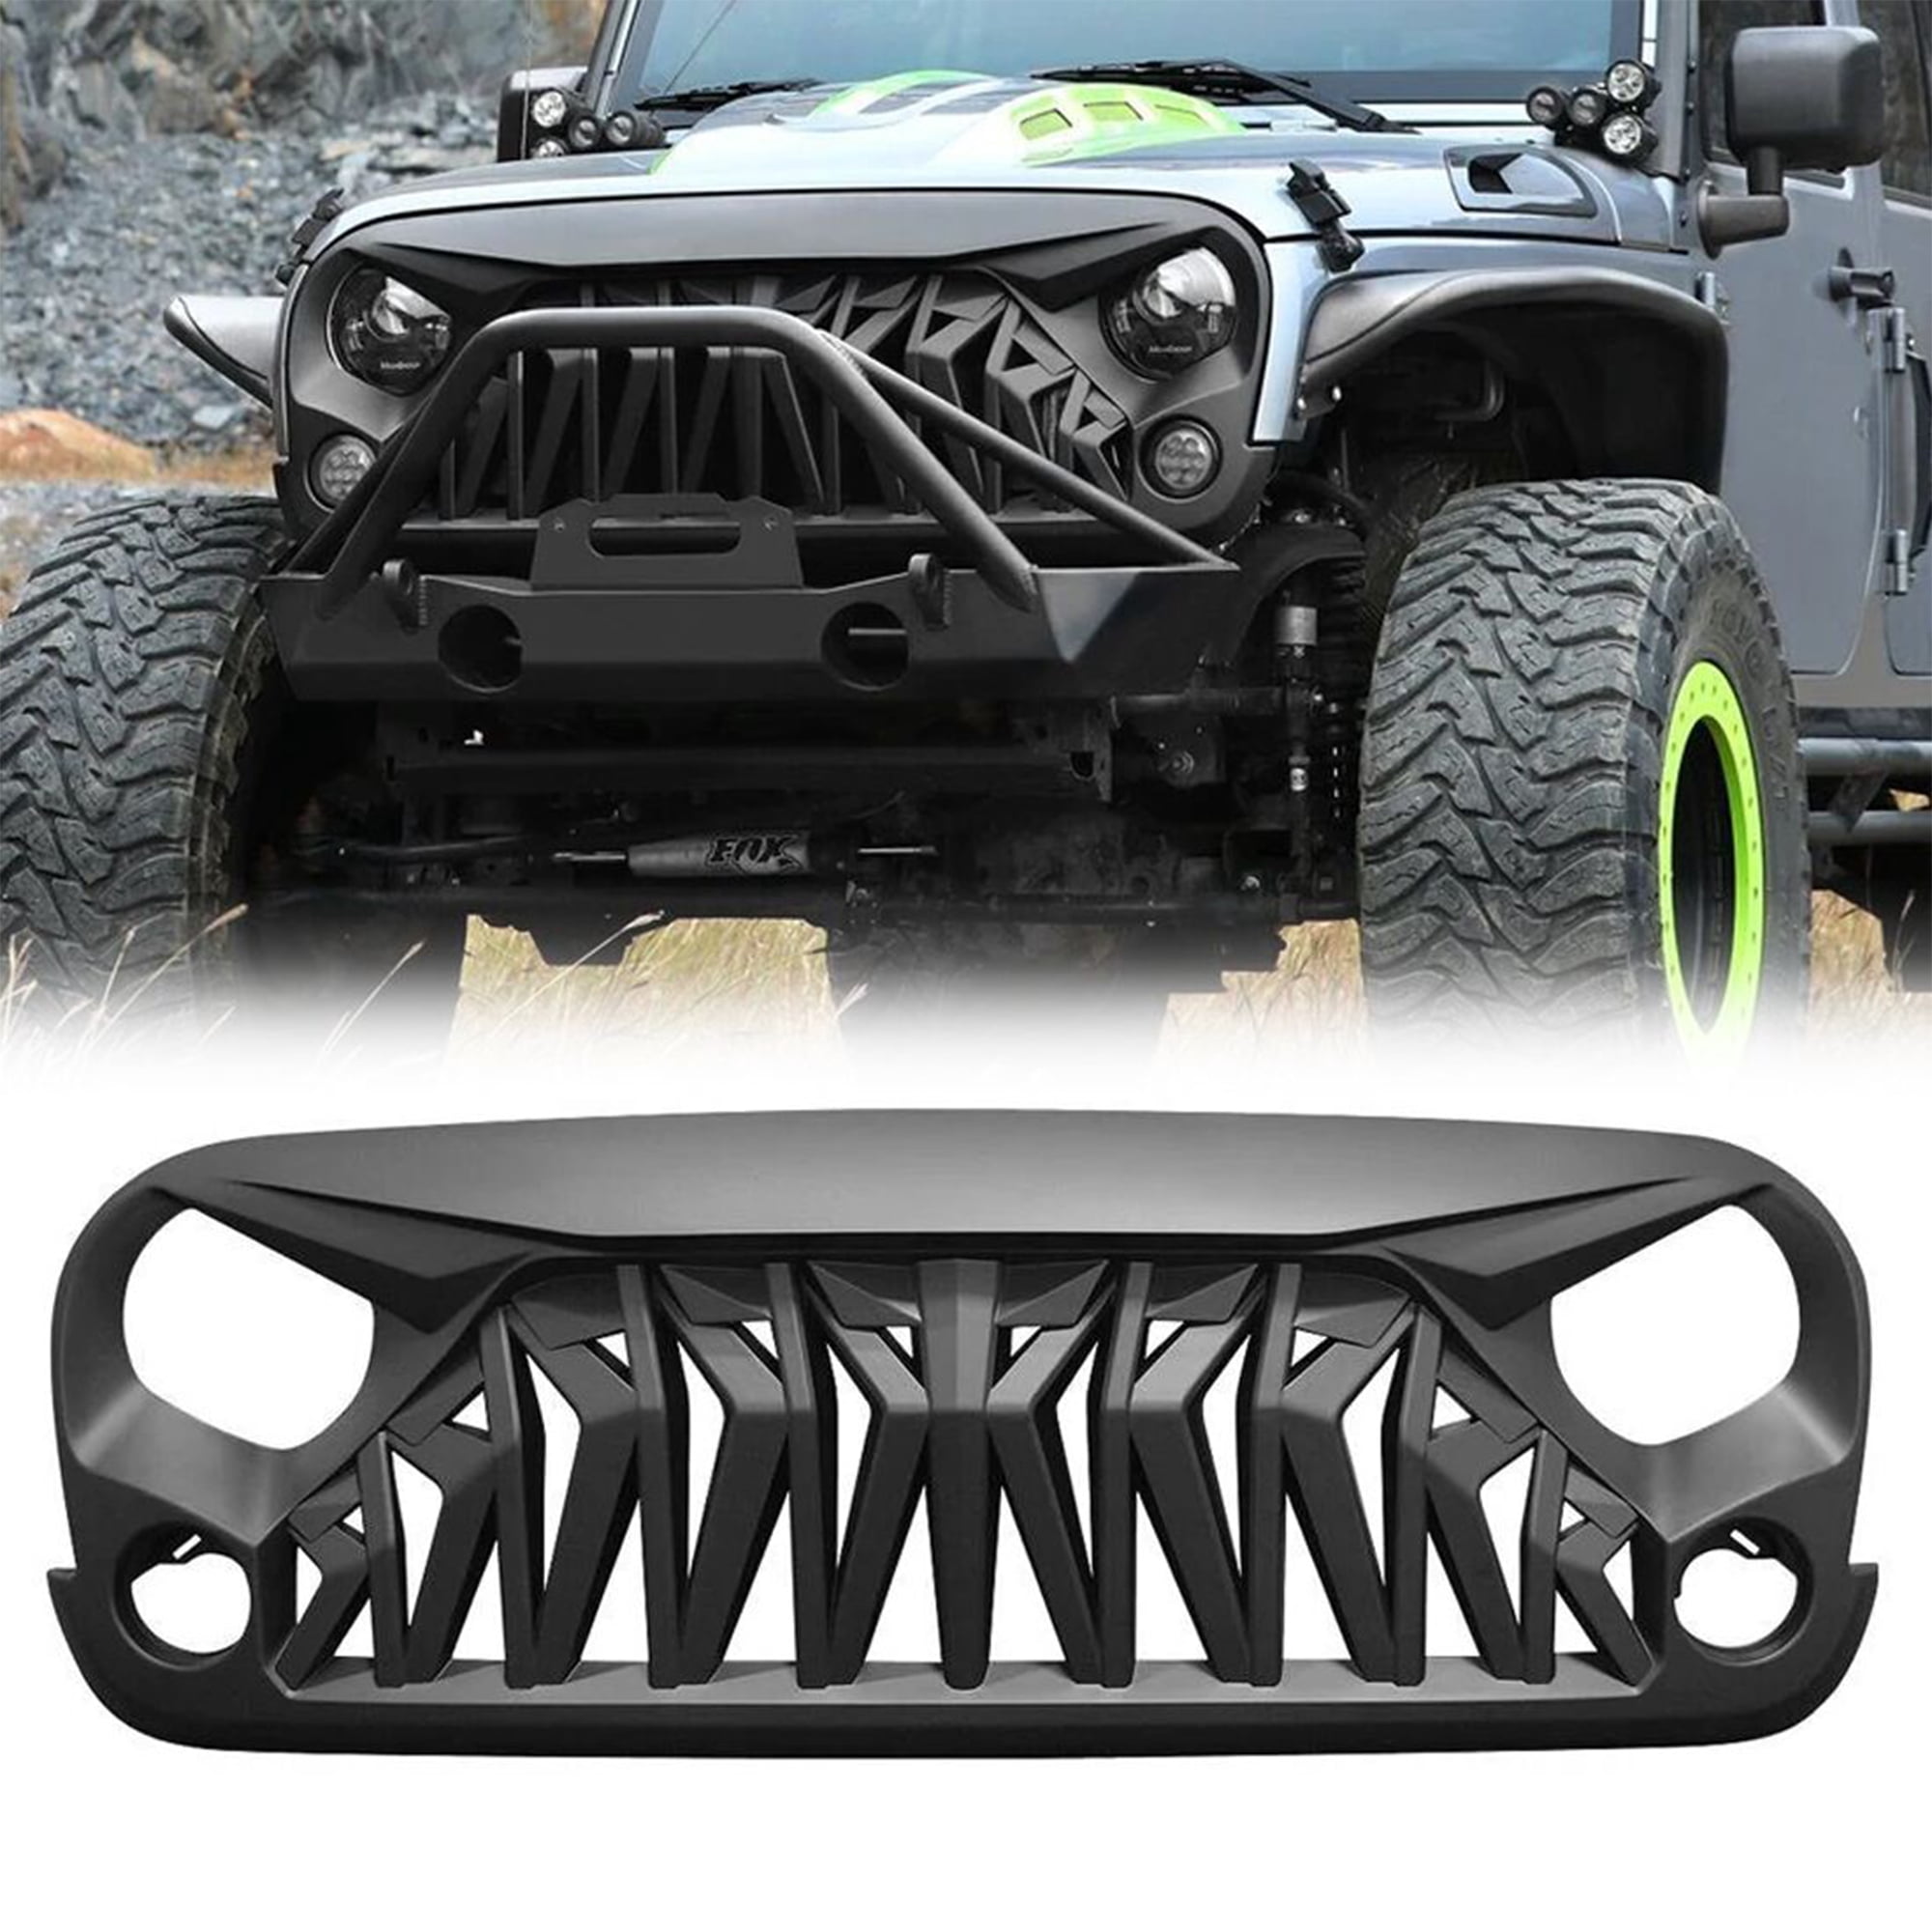 American Modified Shark Grille for 2007 to 2018 Jeep Models, Matte Black |  Walmart Canada